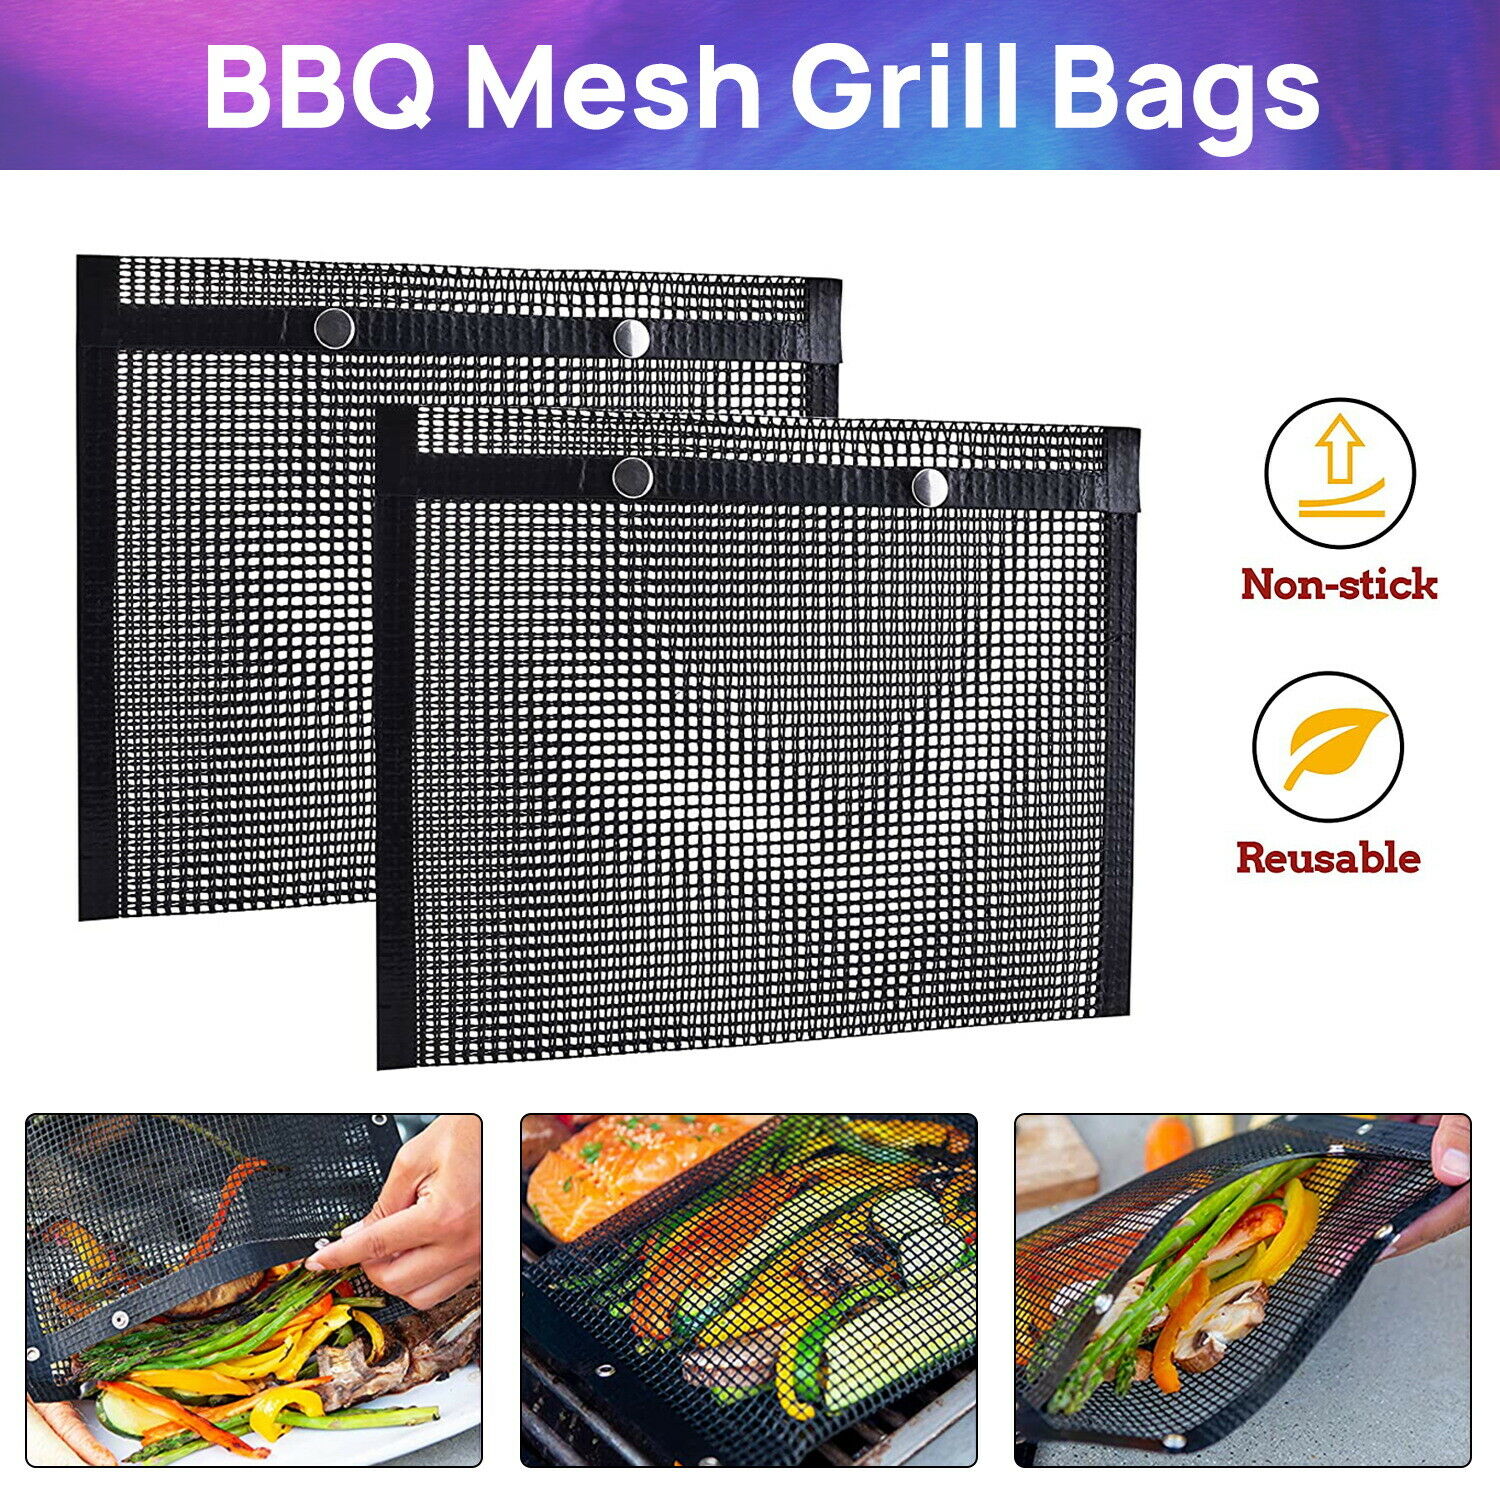 Non-stick BBQ Grilling Mesh Bag Outdoor Camping Barbecue Grill Mats Cooking Pads